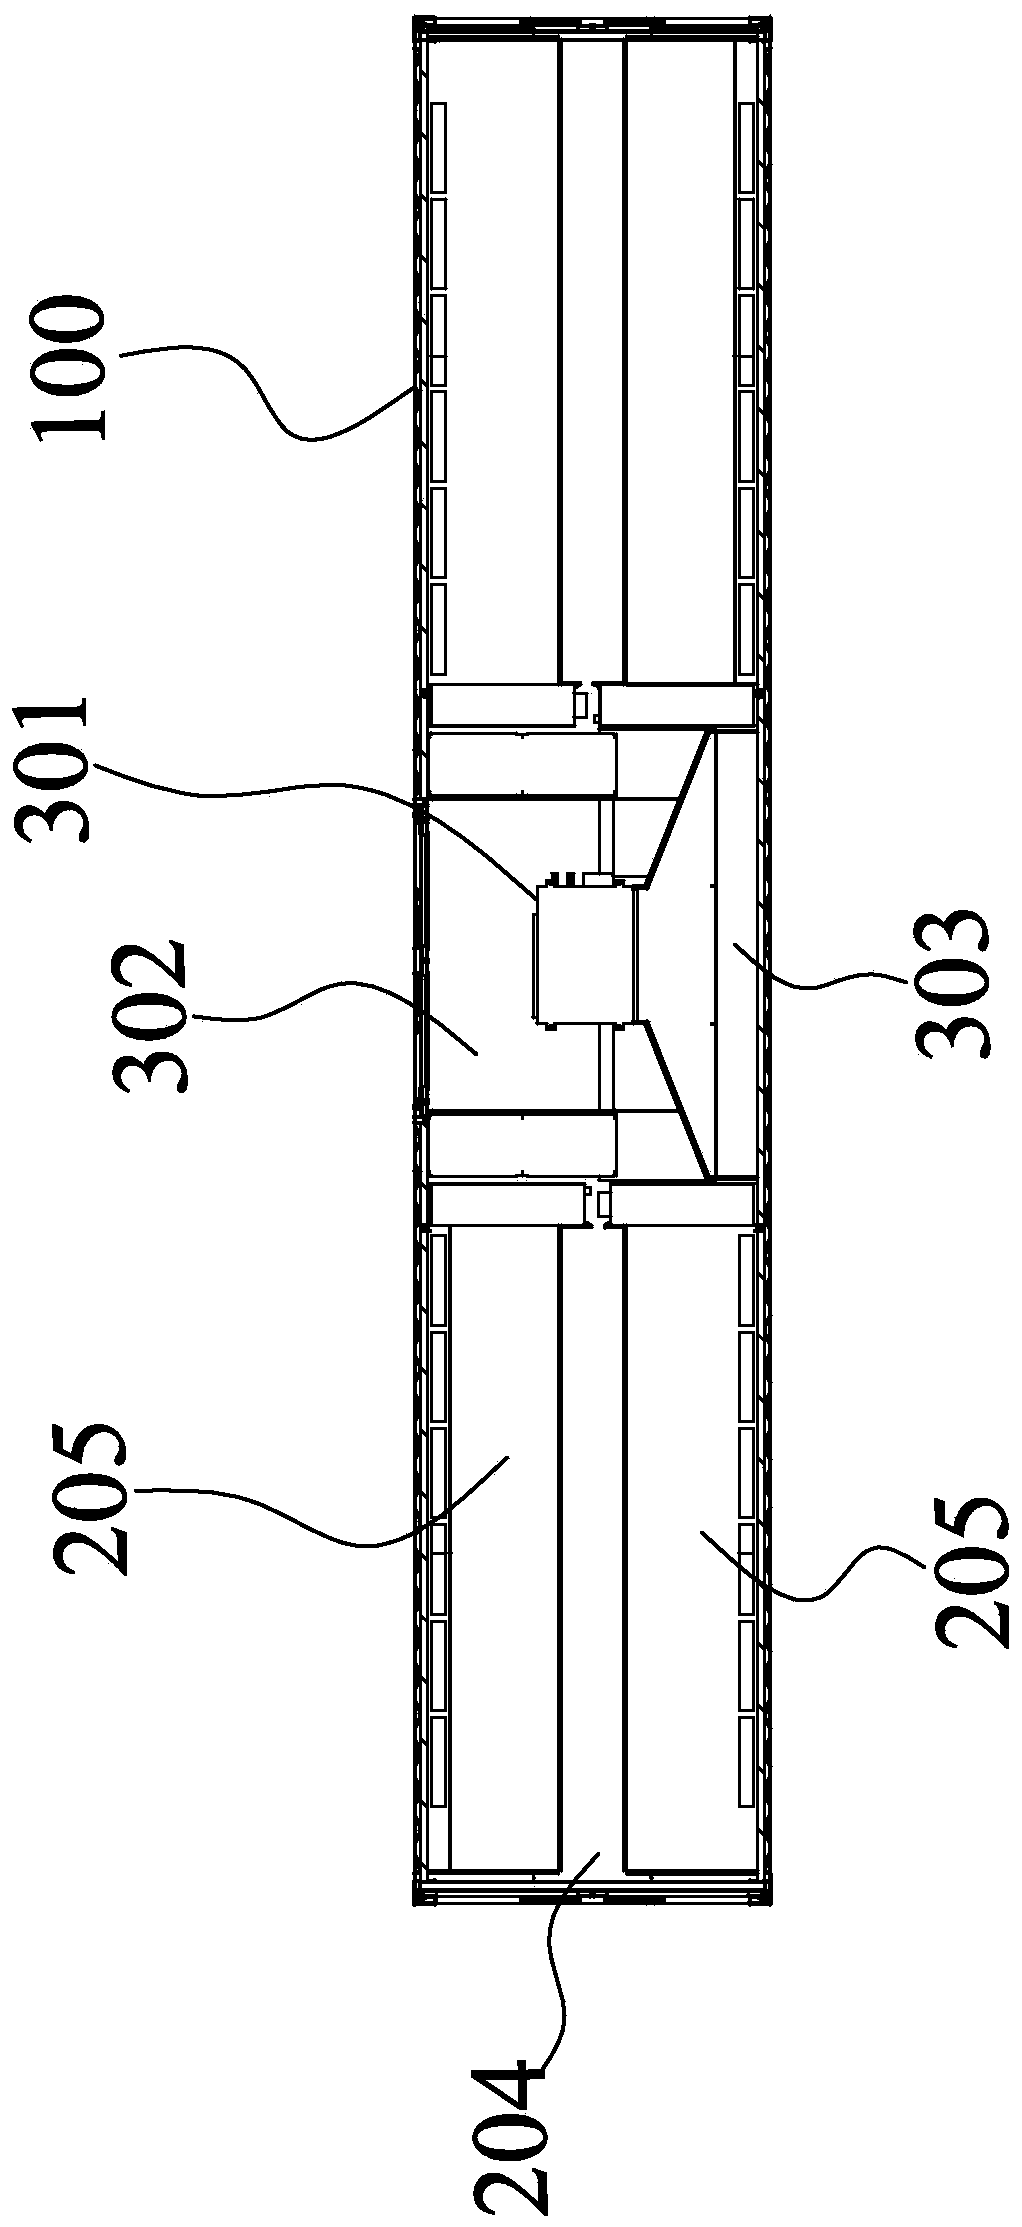 Battery PACK cooling assembly, energy storage container and cooling method